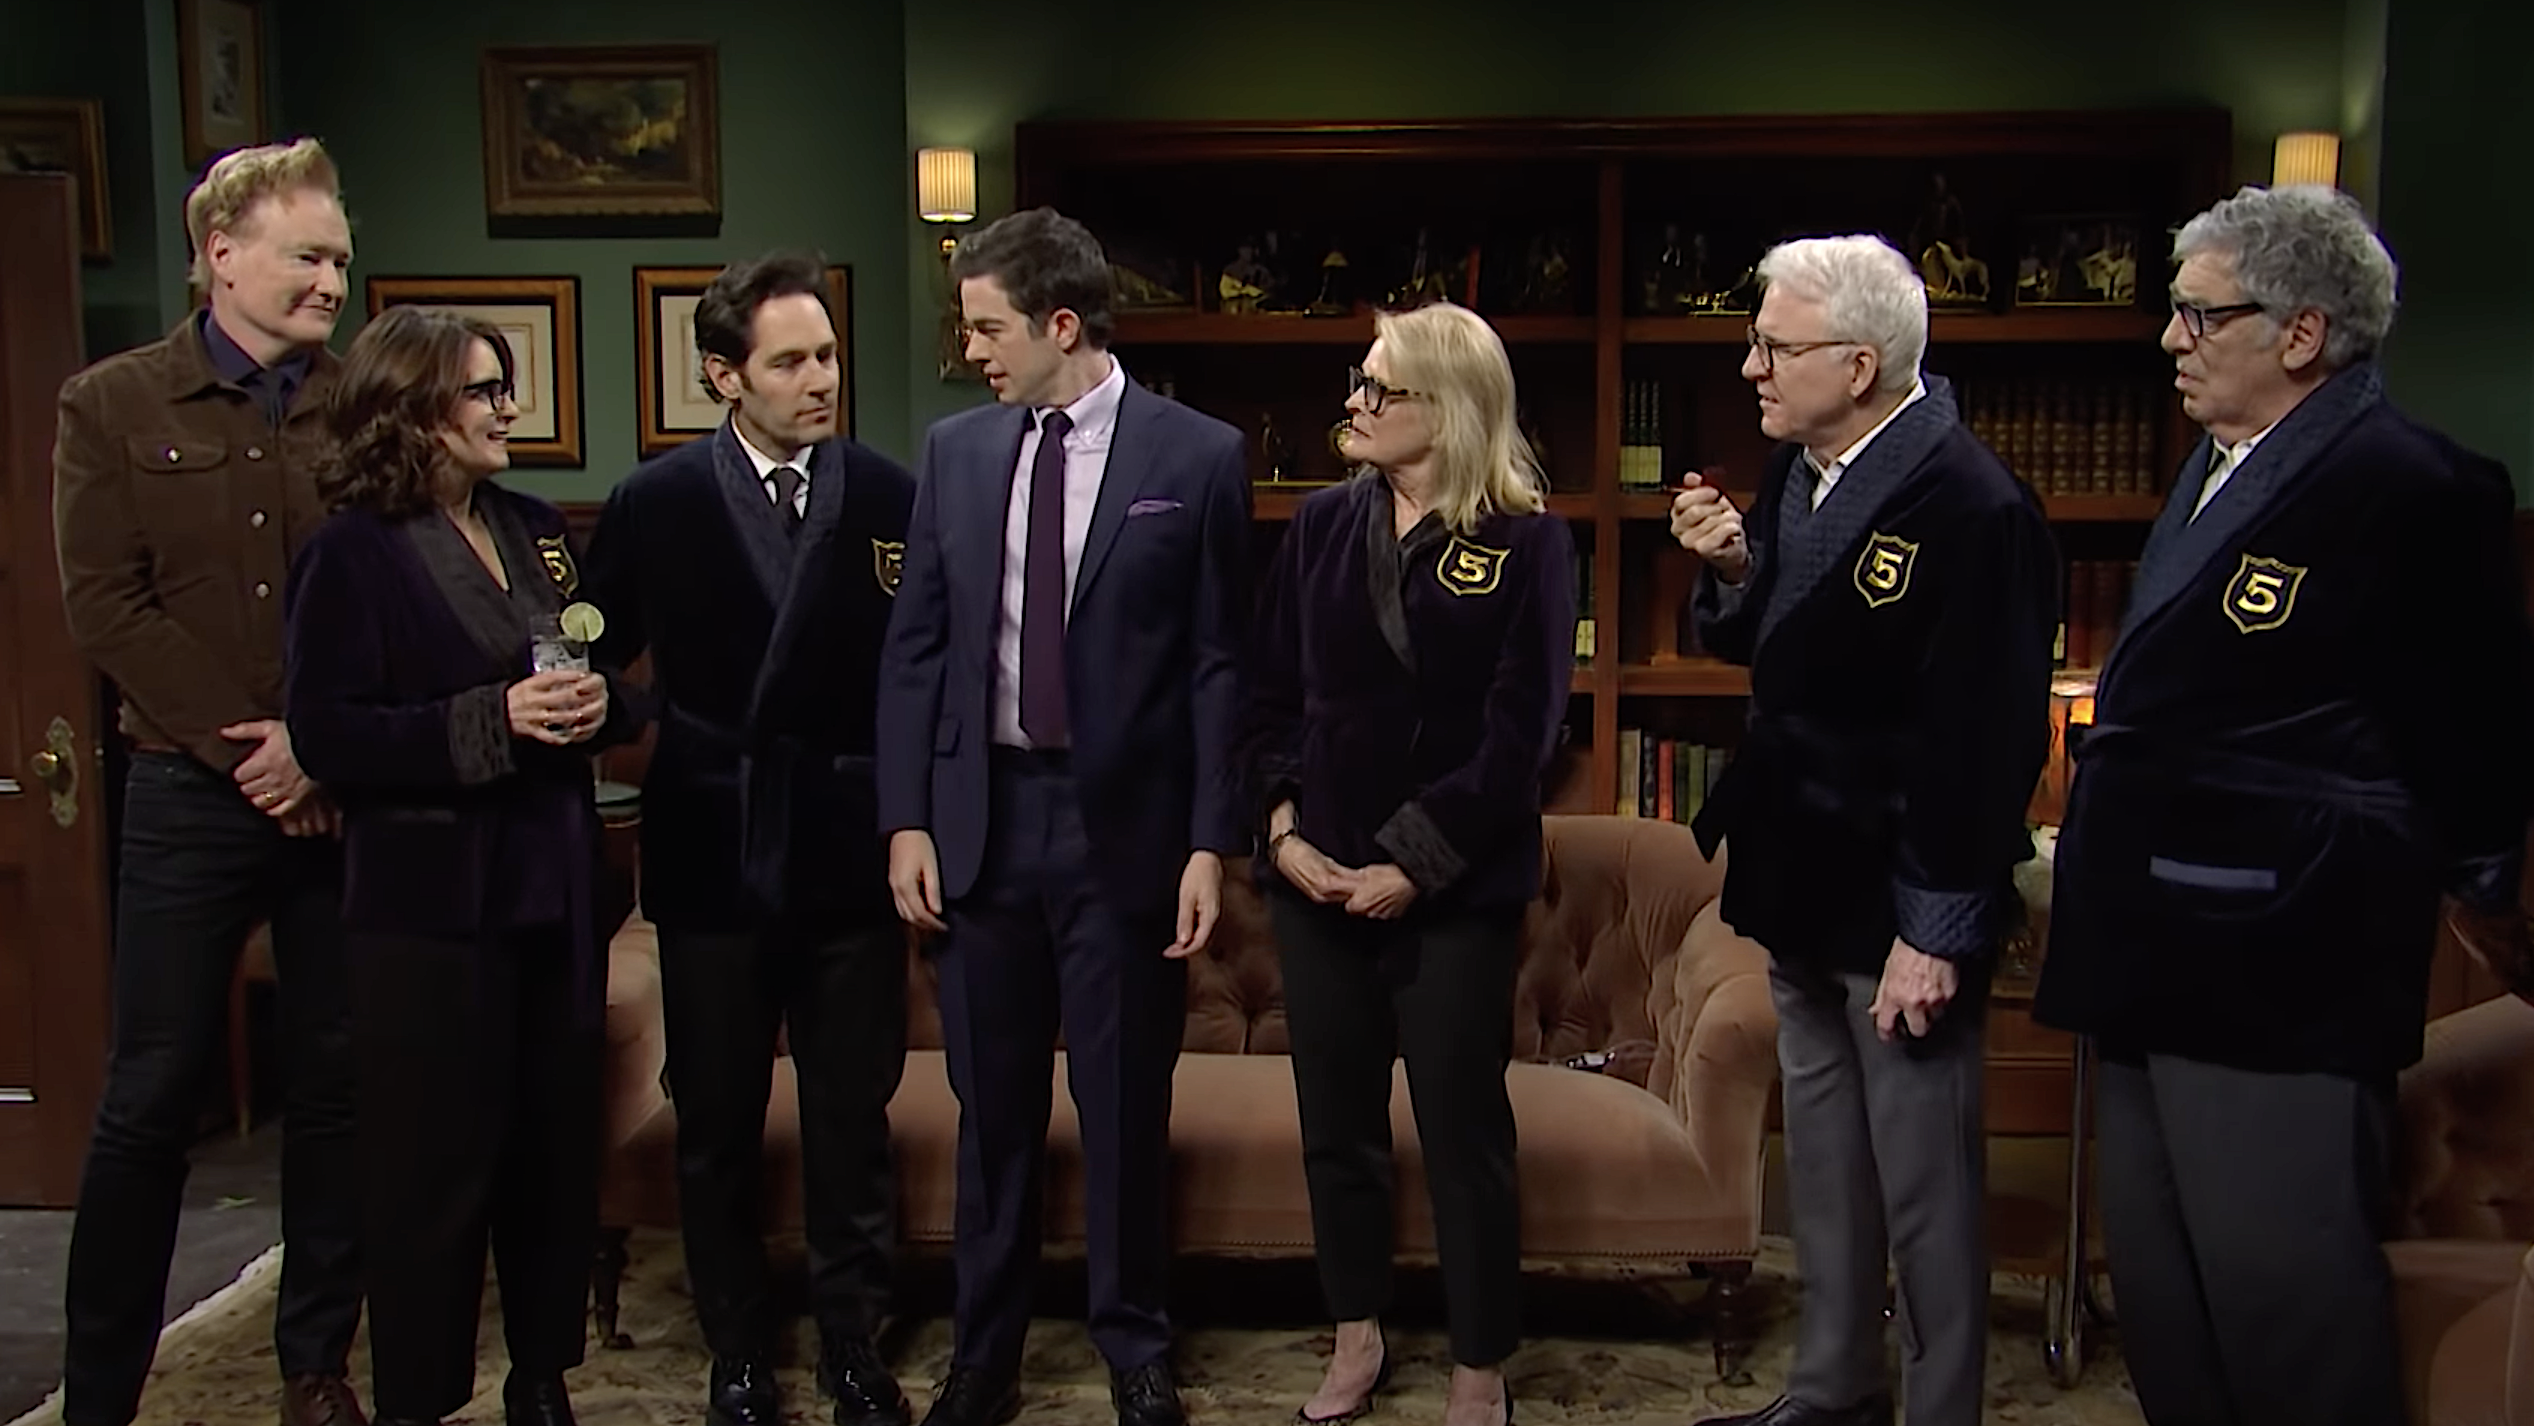 Hosting his fifth SNL, John Mulaney joins a very crowded Five Timers Club